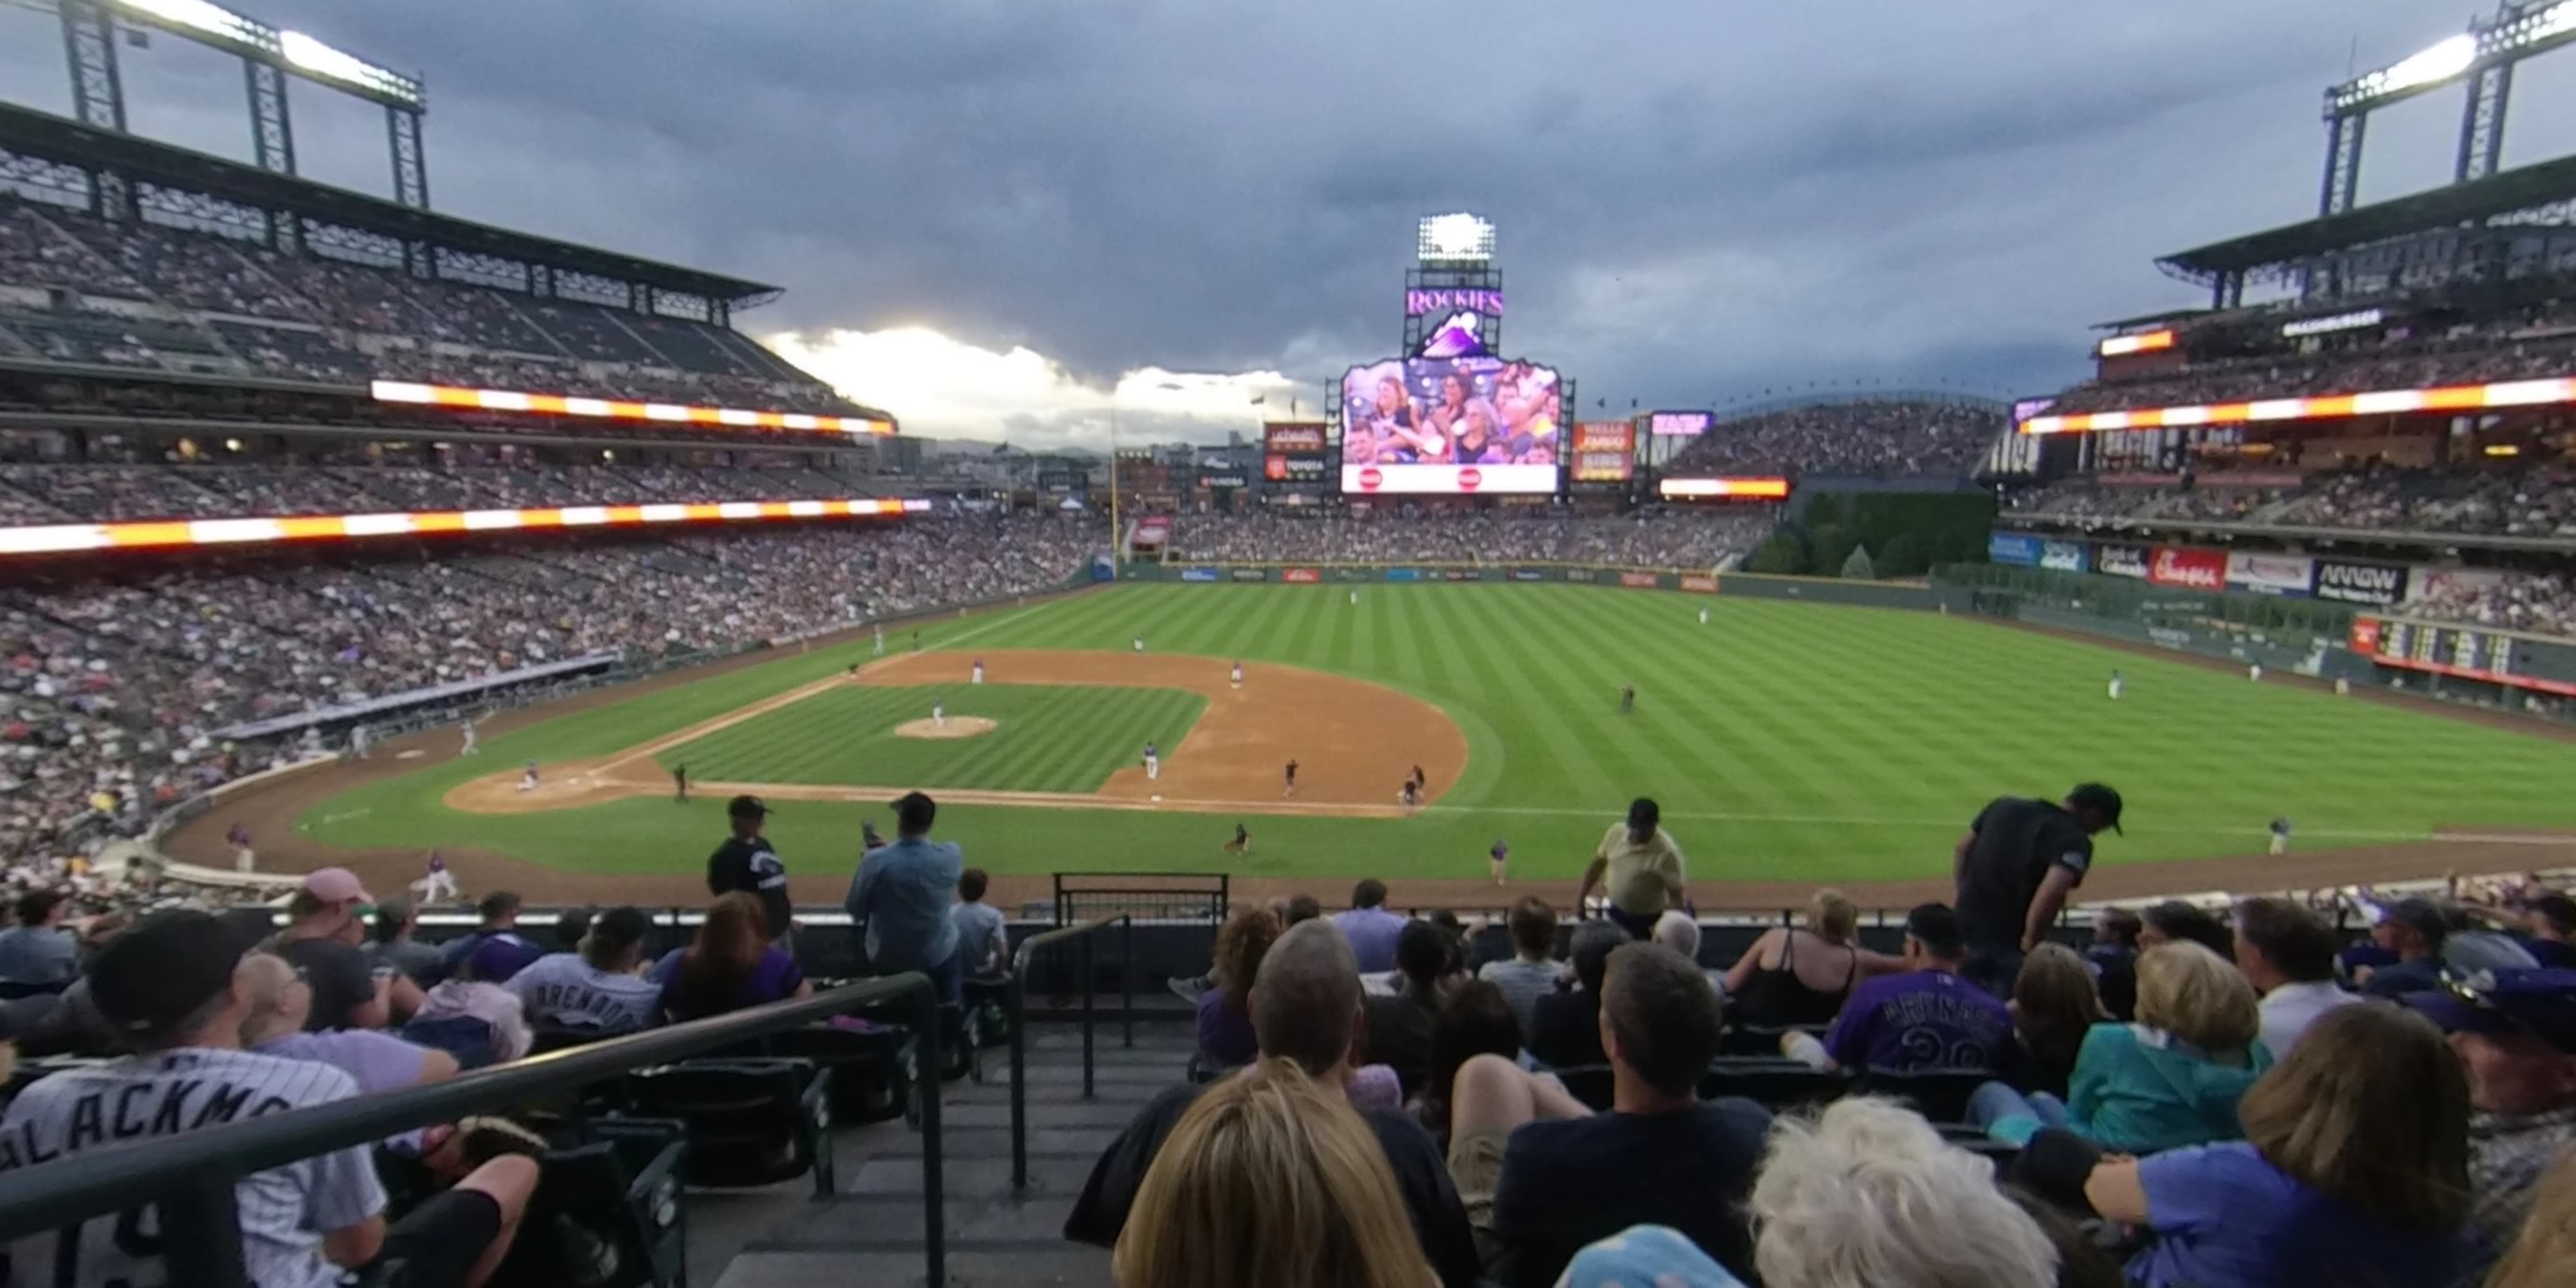 Section 221 At Coors Field Rateyourseats Com